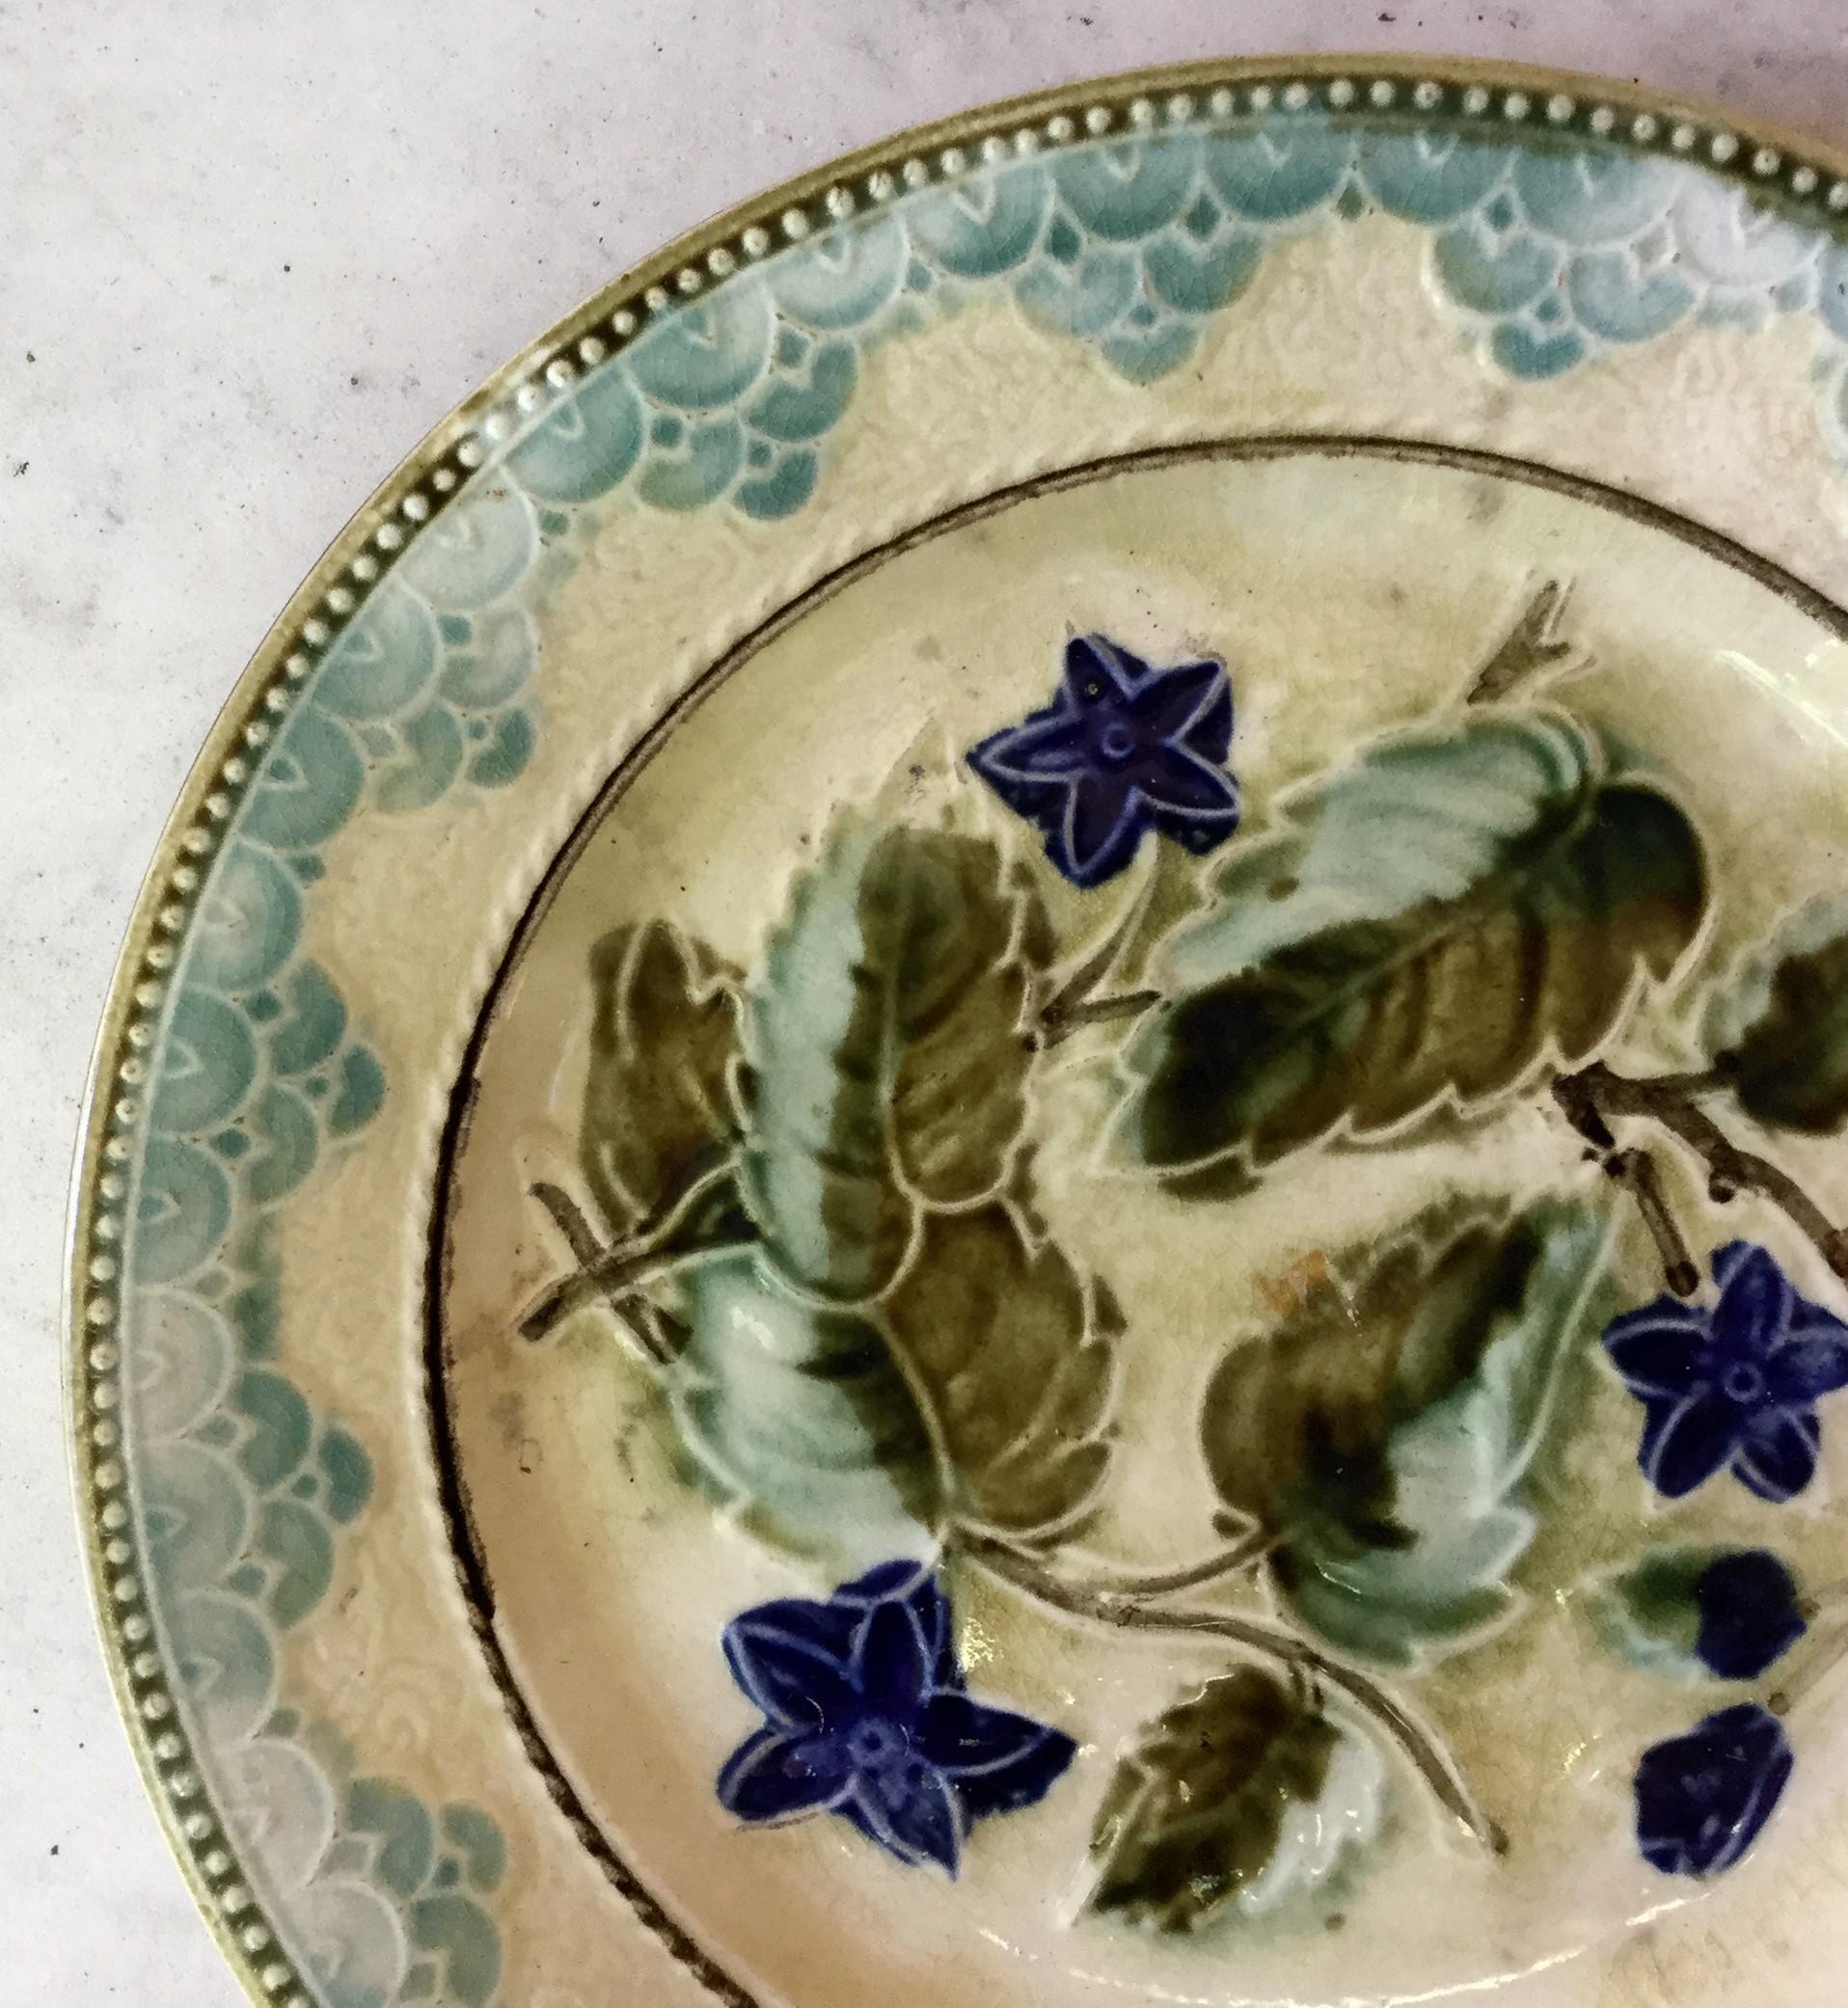 Majolica plate with blue flowers and leaves circa 1890 attributed to Onnaing.